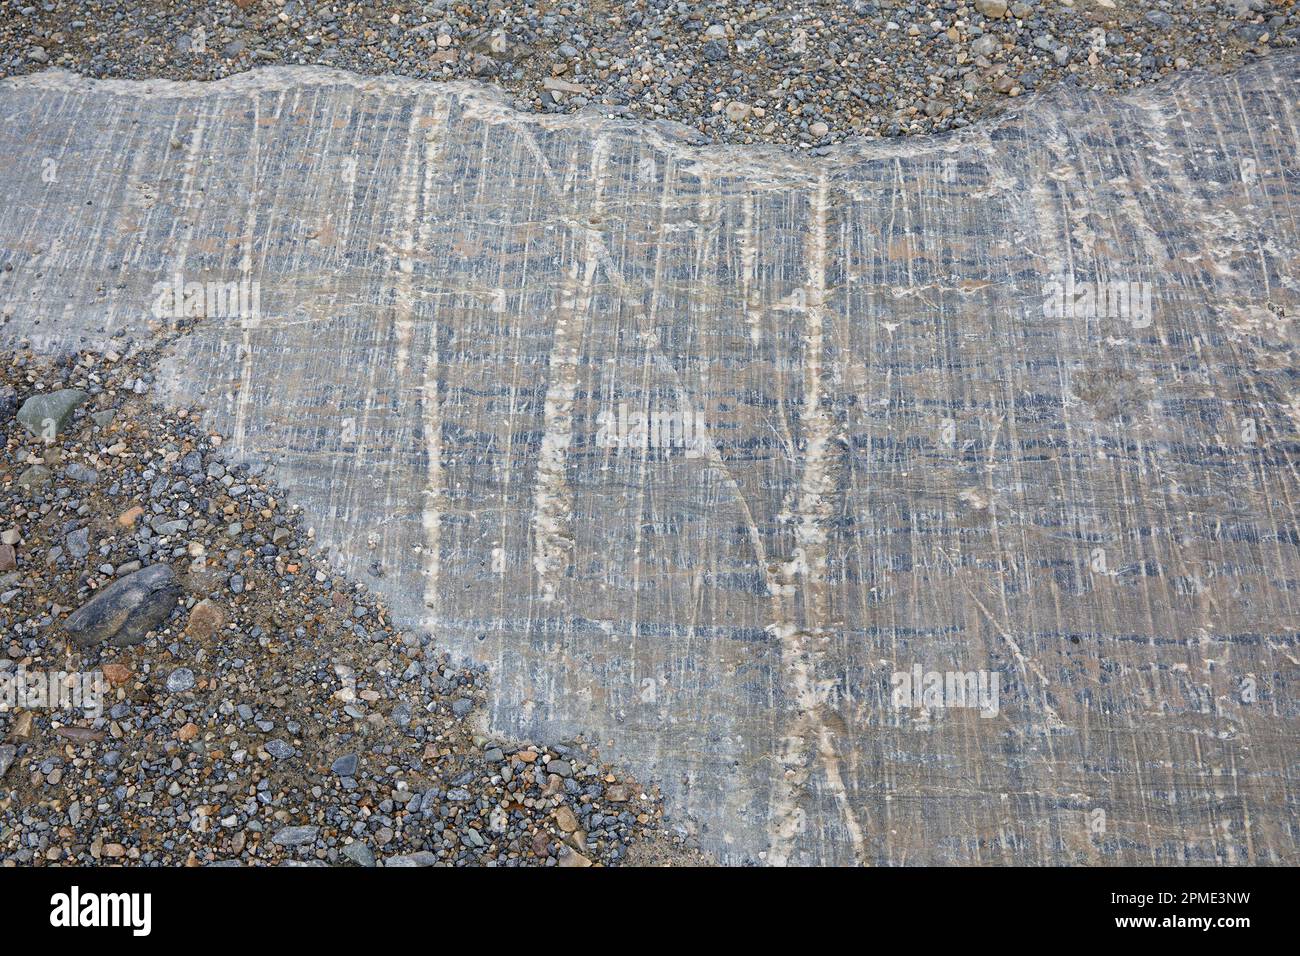 Glacial striations left by the Athabasca glacier, parallel scratches in rock that show the direction of ice movement, Jasper National Park, Canada Stock Photo